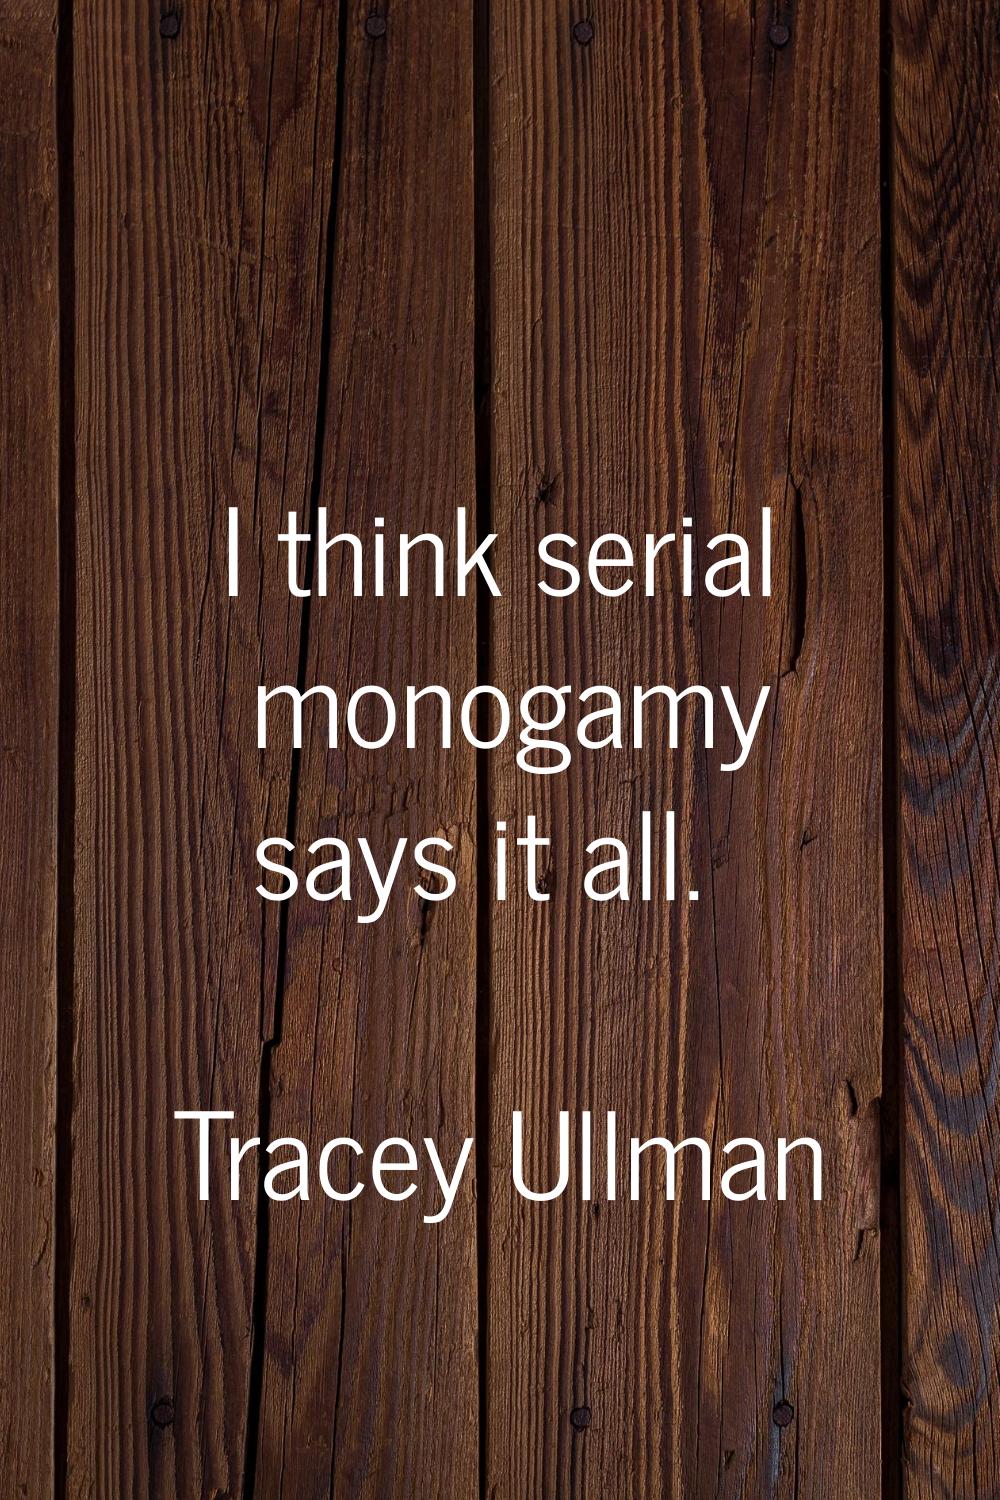 I think serial monogamy says it all.